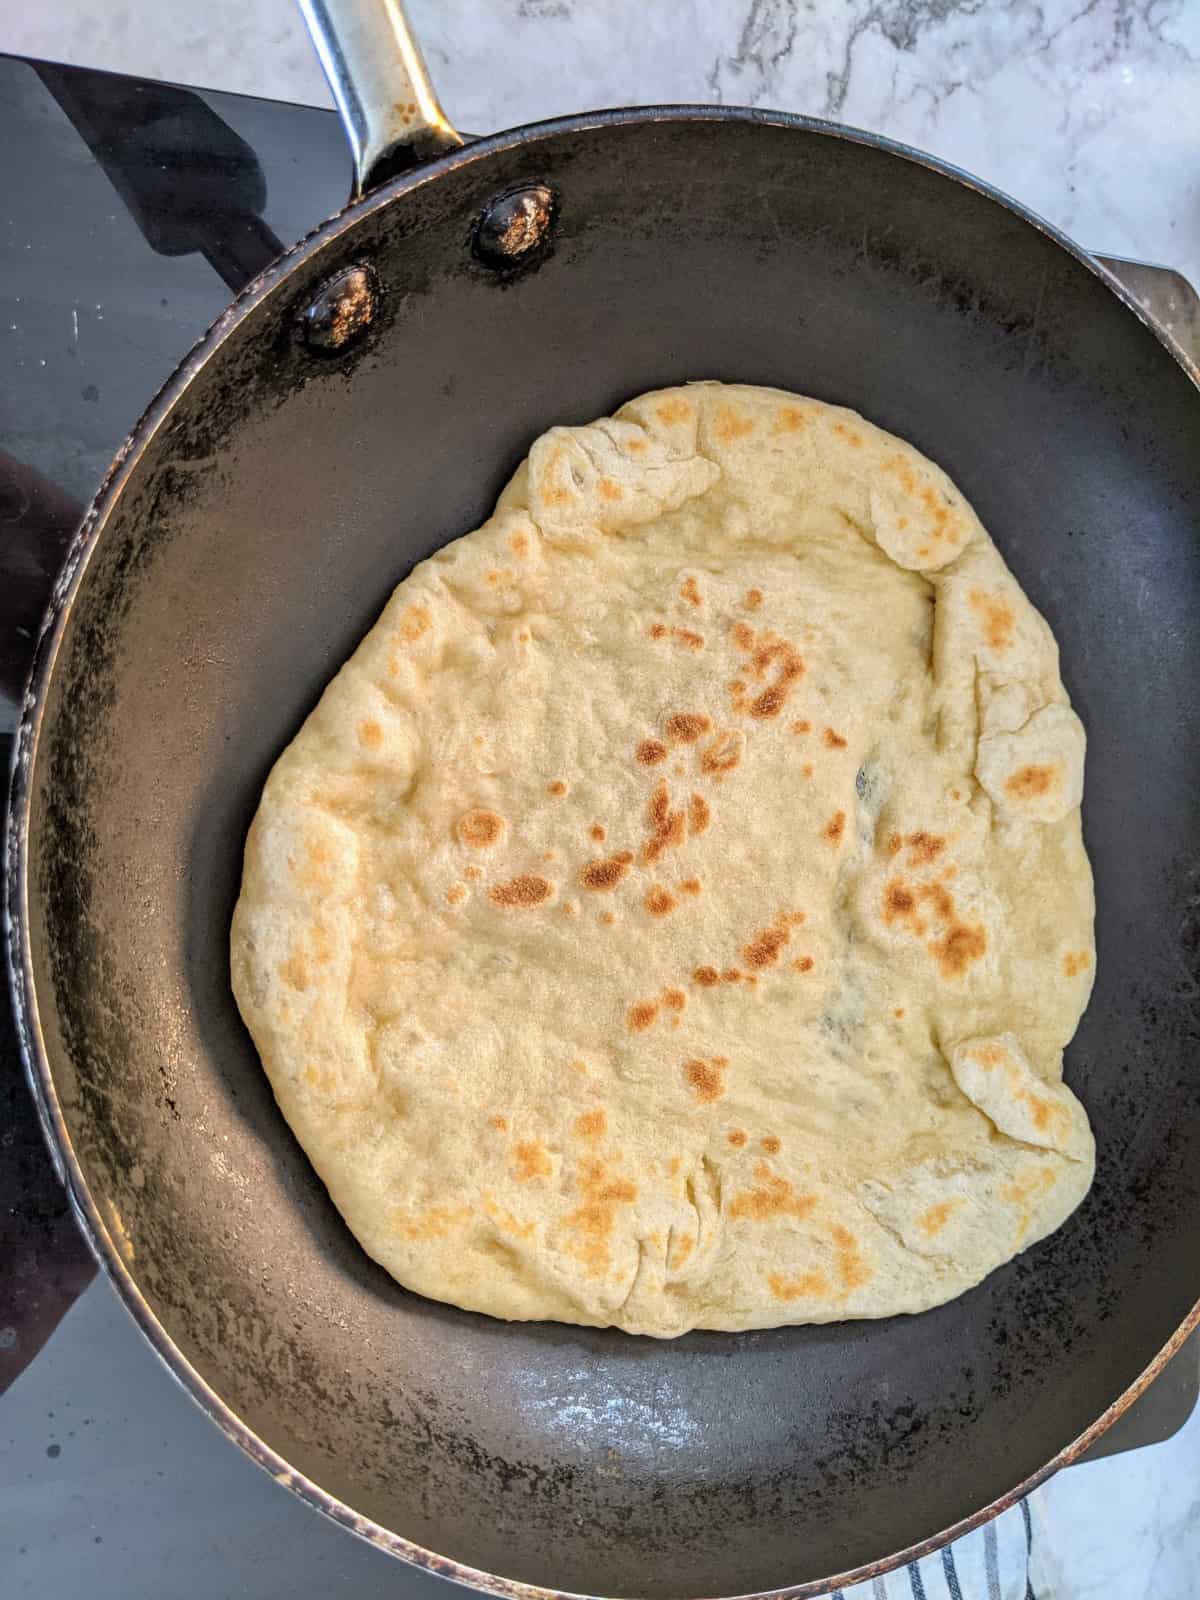 Pita bread on pan with one side already cooked.